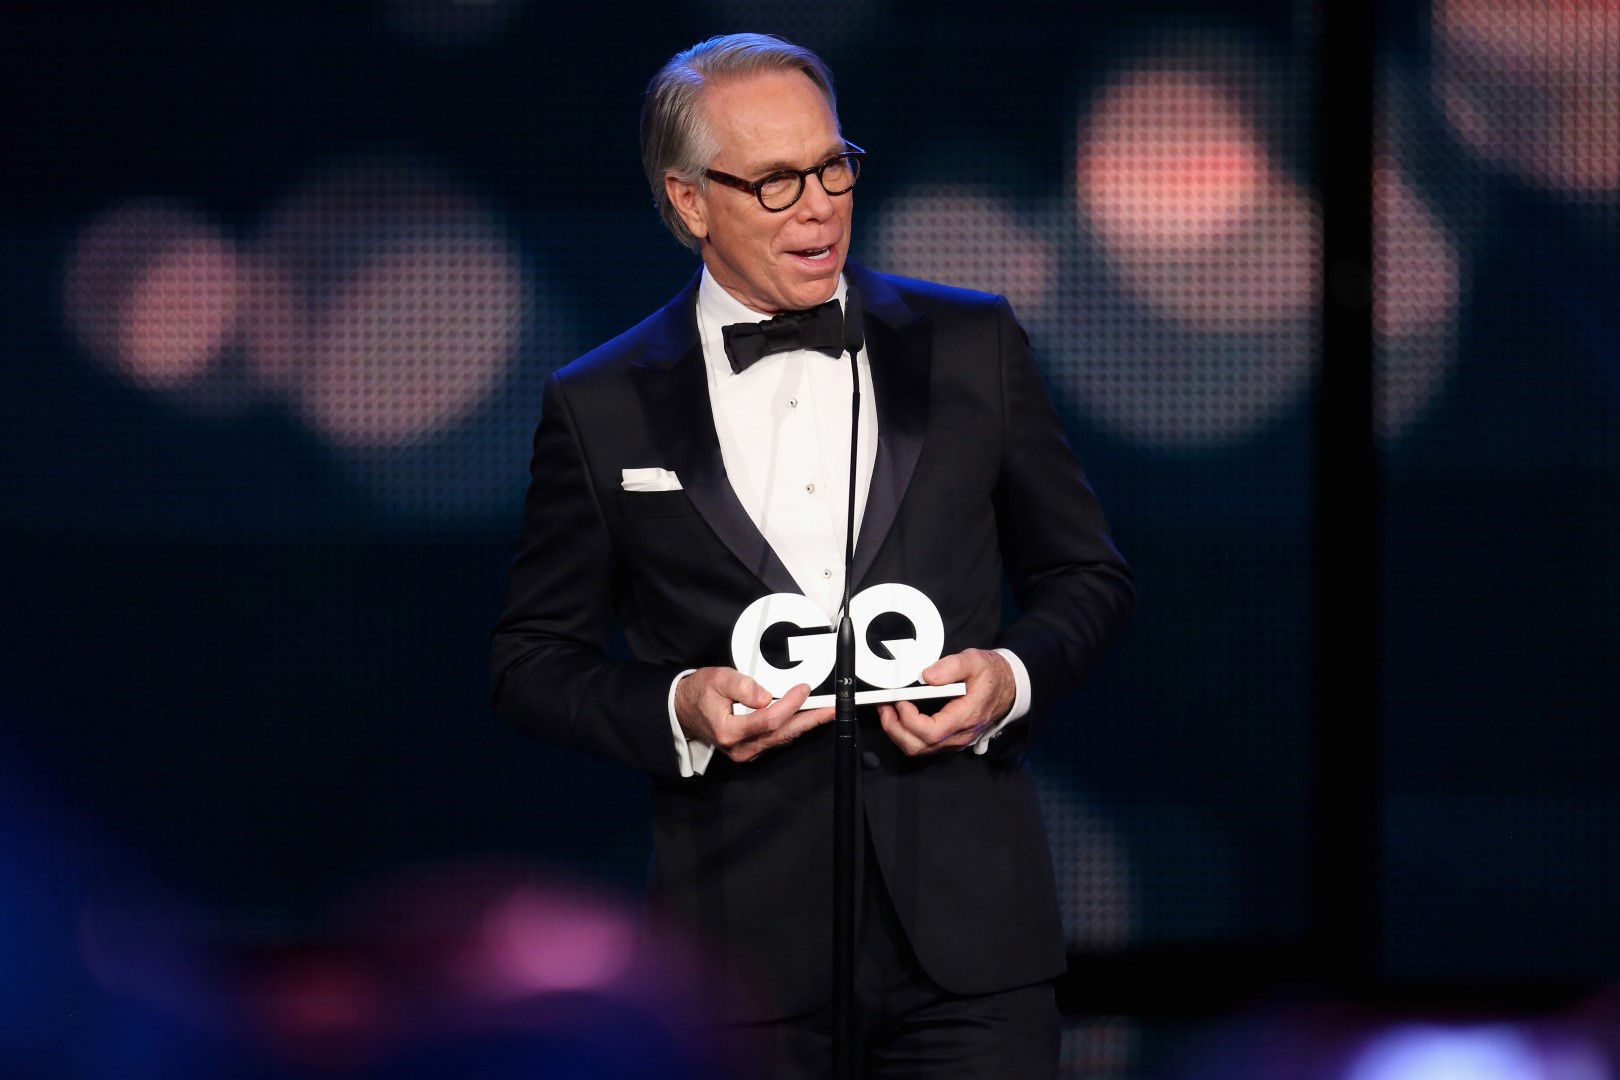 GQ Men of the Year Berlino 2015: Tommy Hilfiger premiato come &#8220;Fashion Designer of the Year&#8221;